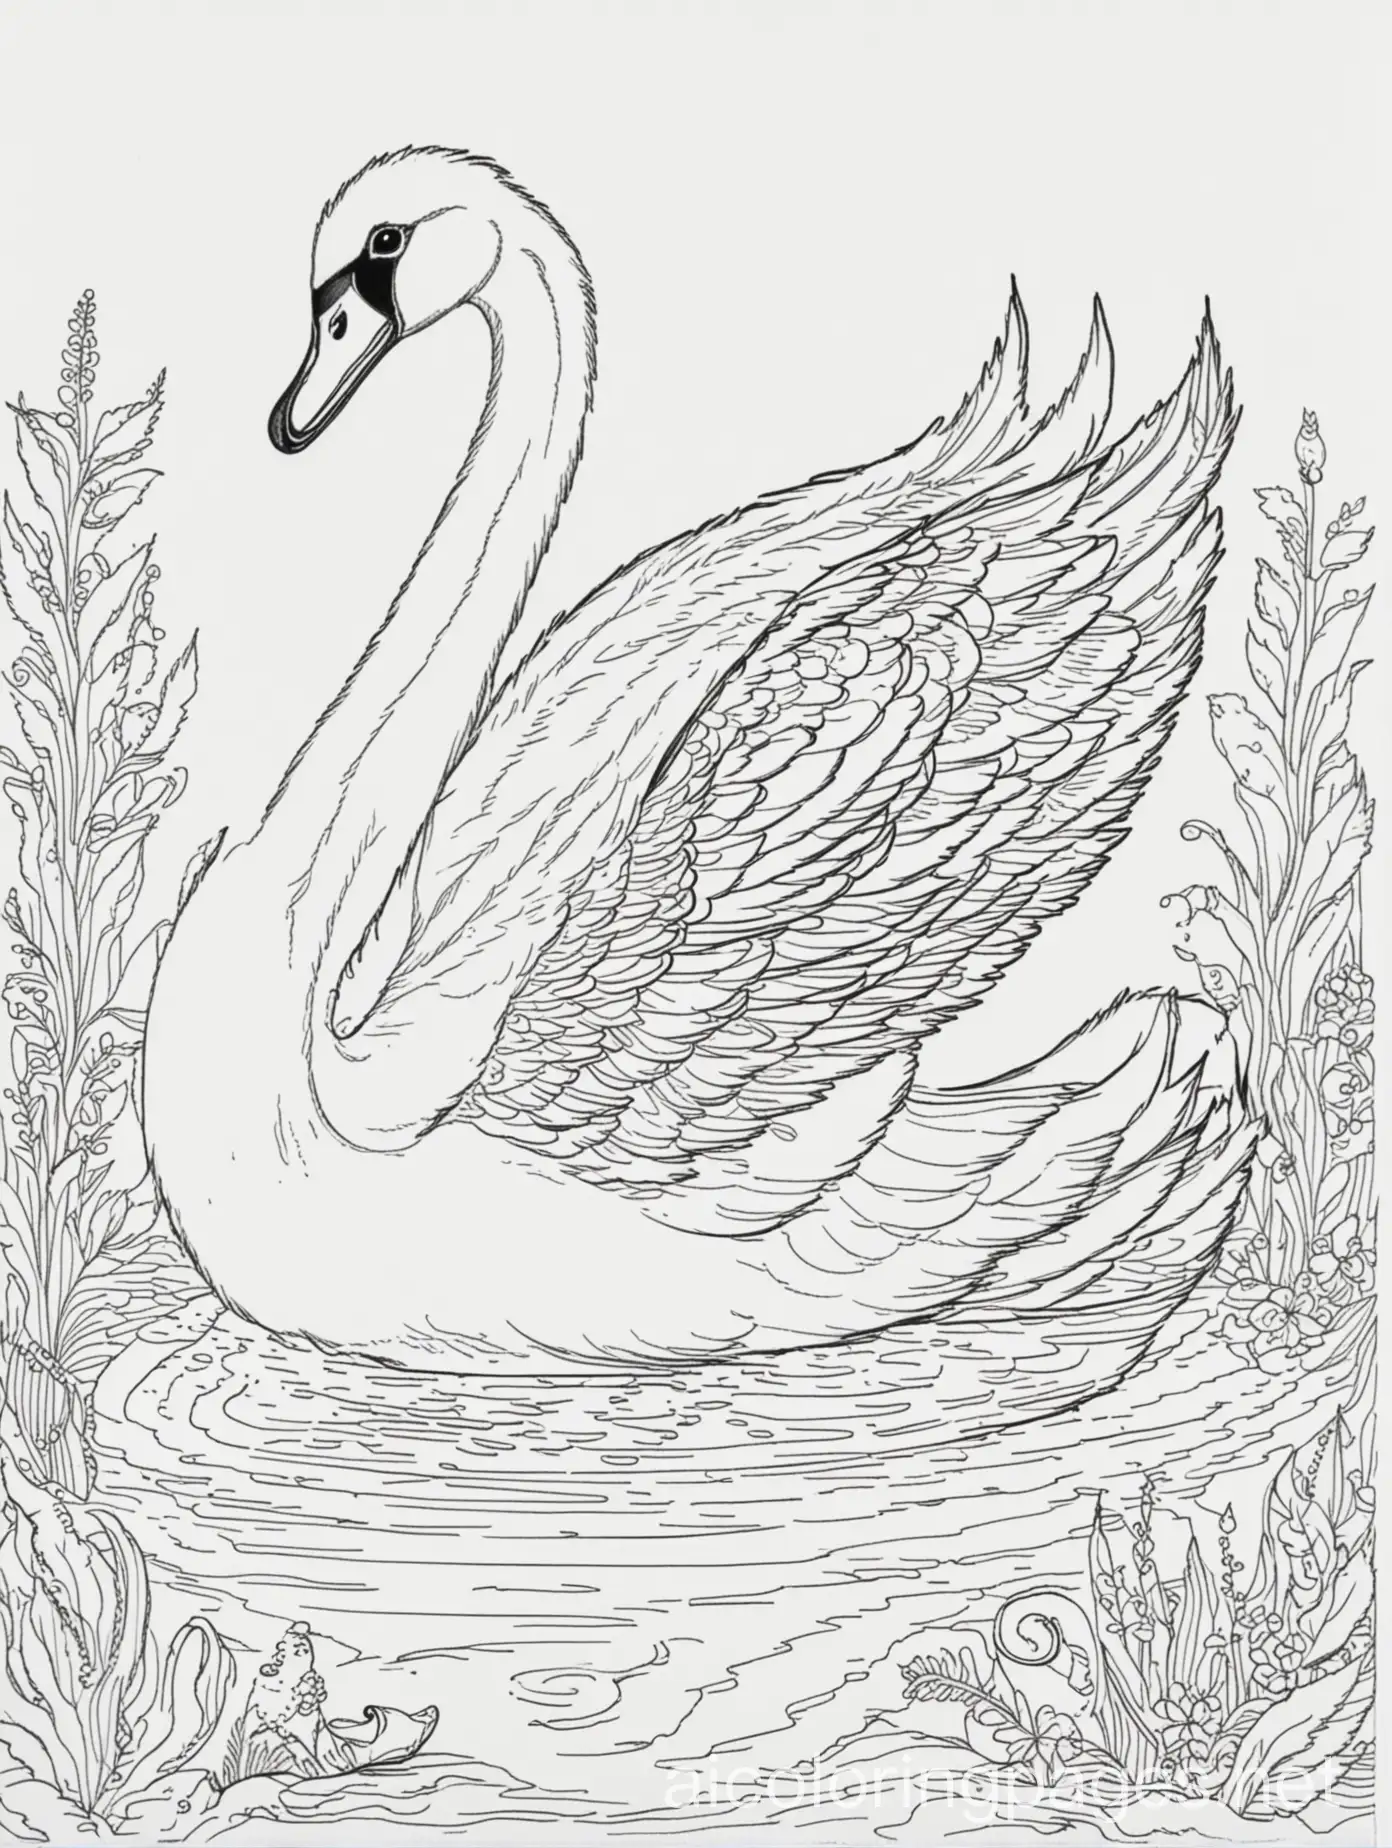 Simple-Swan-Coloring-Page-Black-and-White-Line-Art-for-Kids